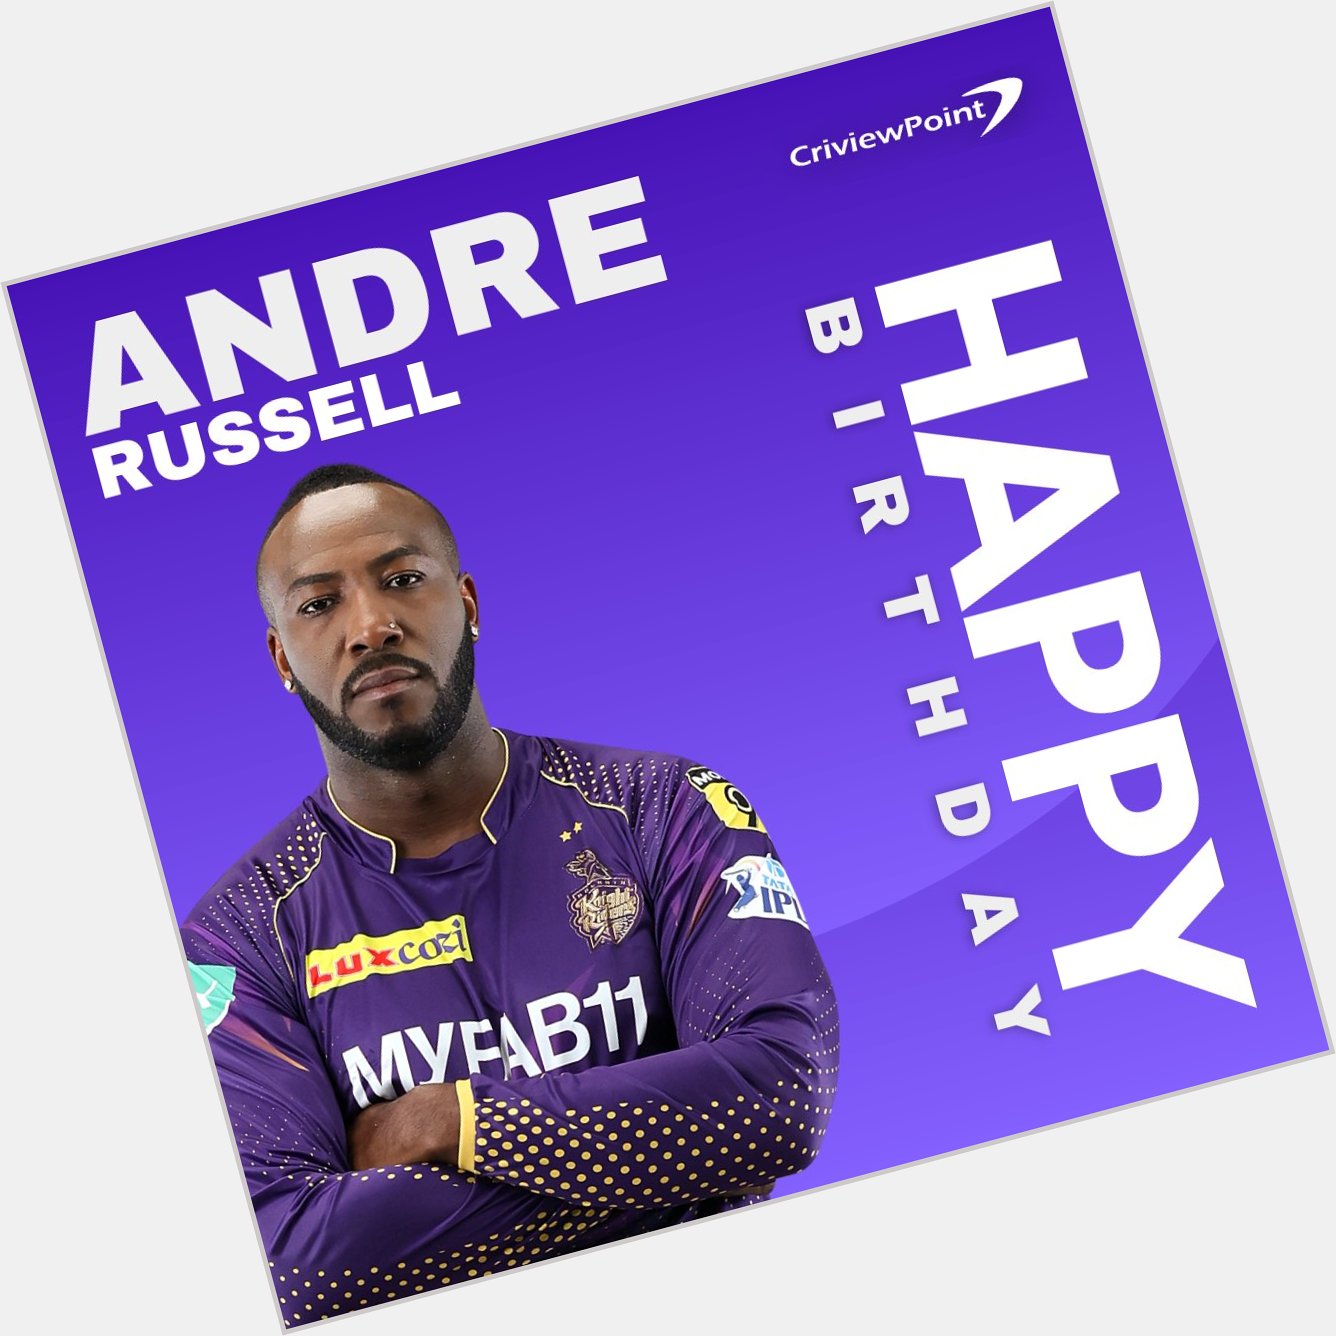 Wishing a very happy birthday to the unstoppable Andre Russell! Keep shining on and off the field   